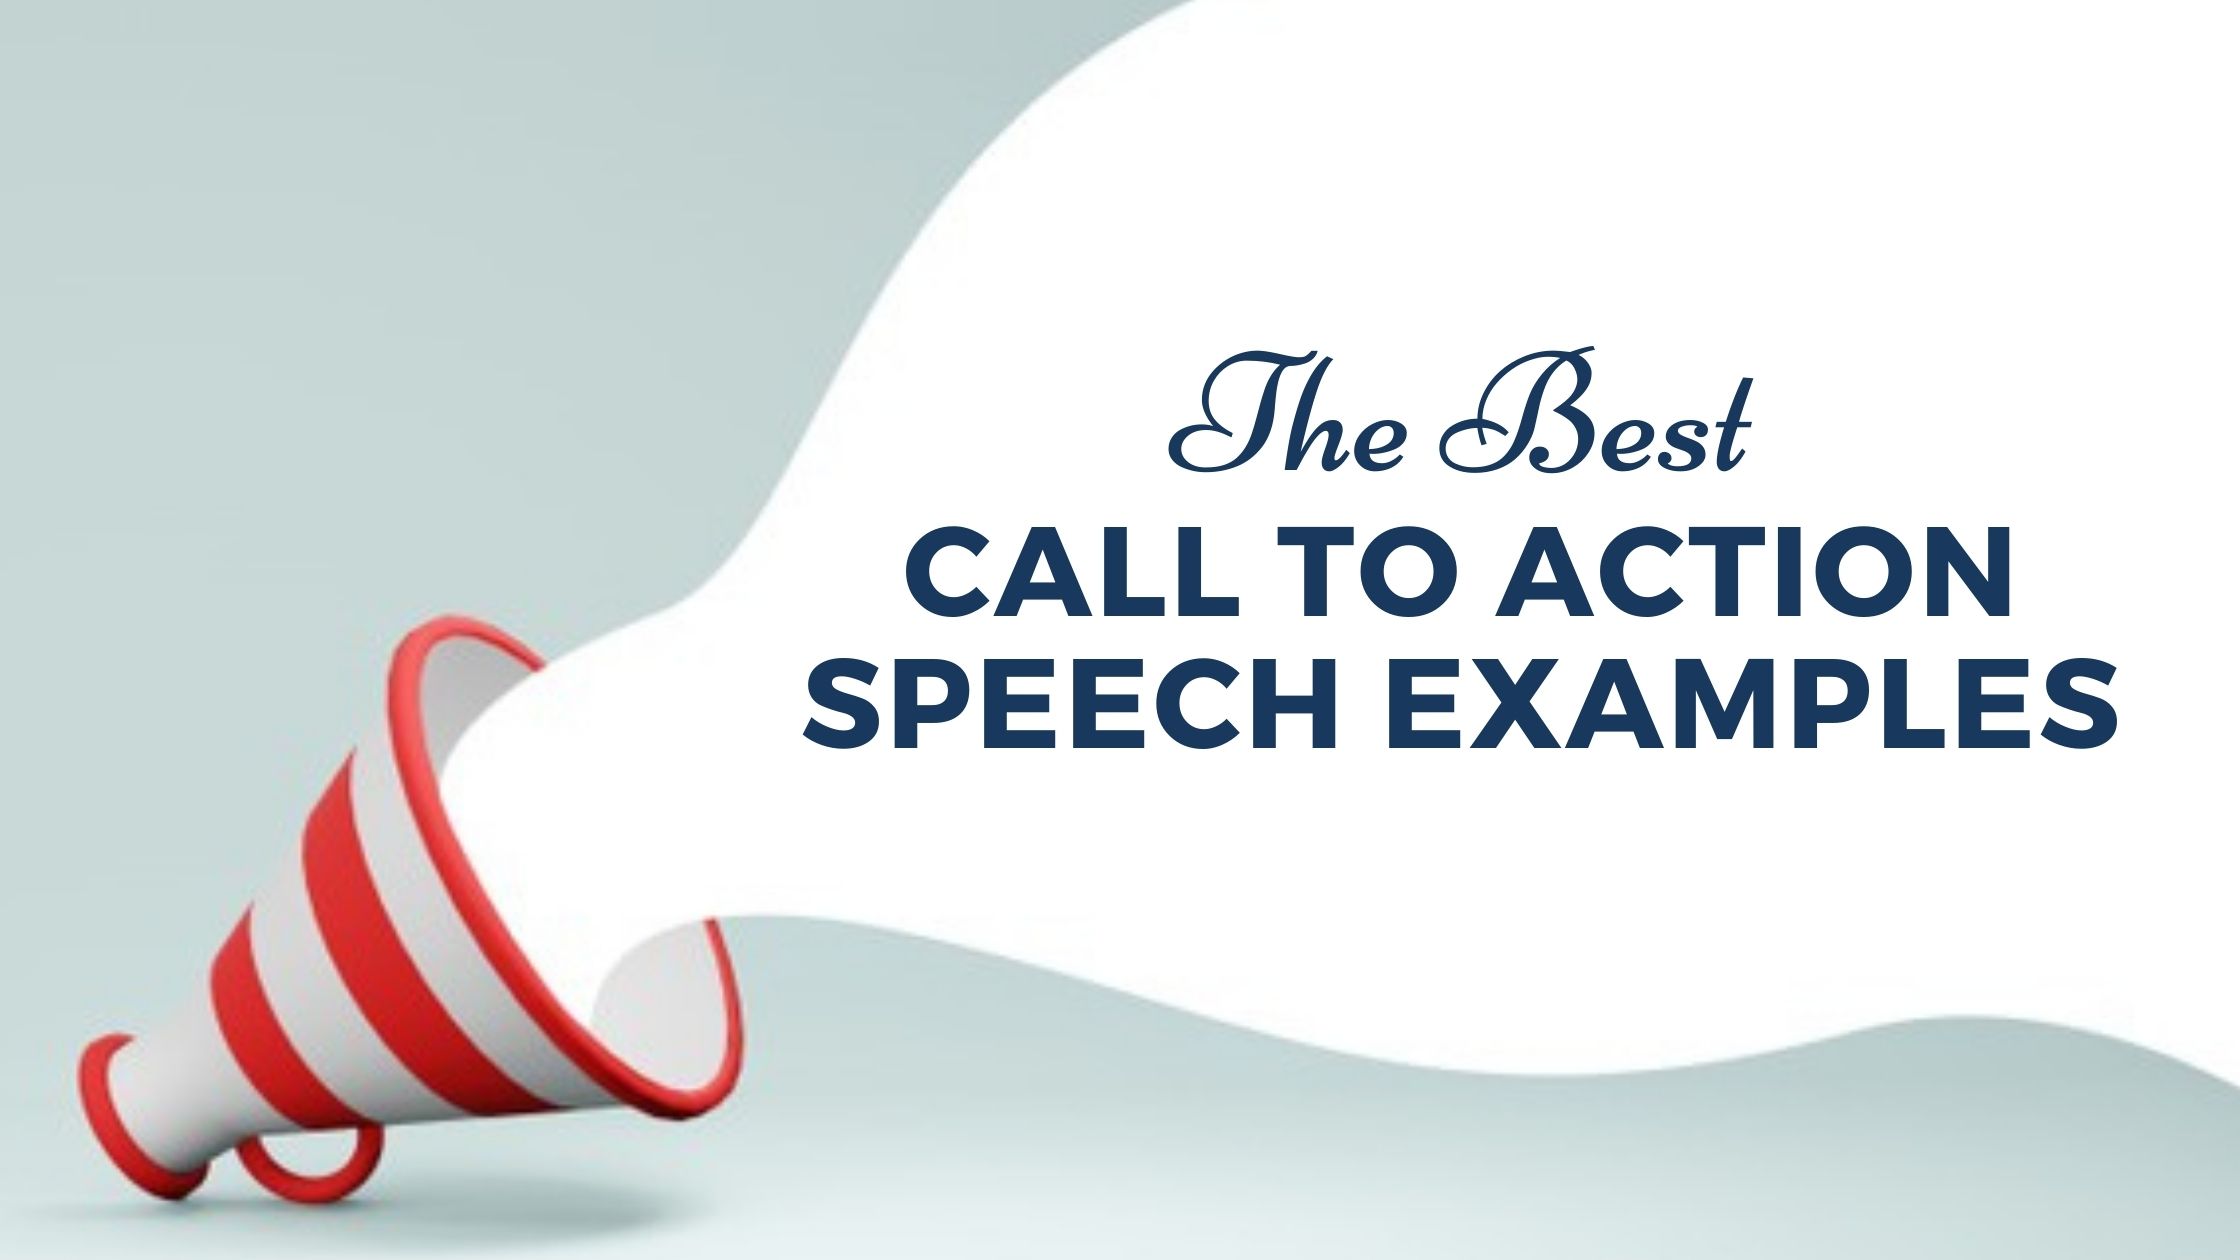 the-best-call-to-action-speech-examples-mitch-carson